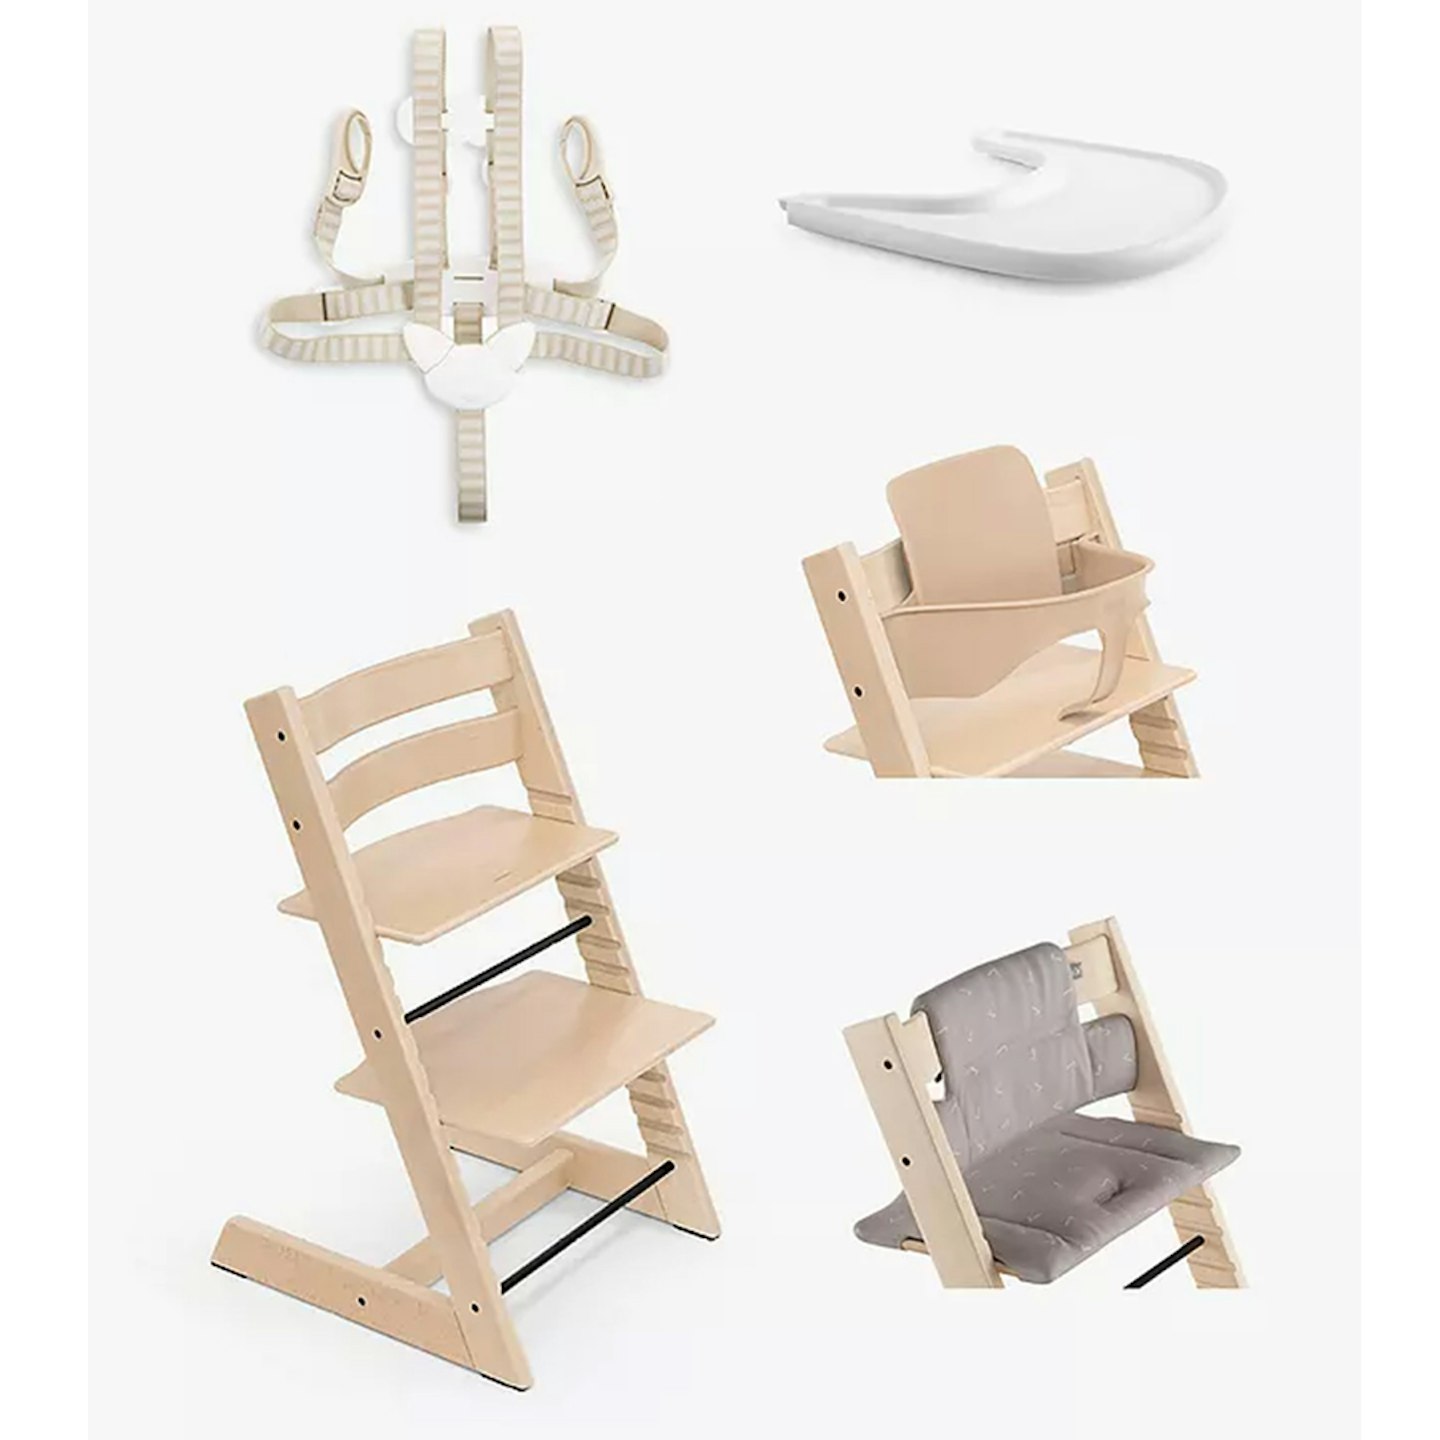 Stokke Tripp Trapp Highchair All you Need Bundle